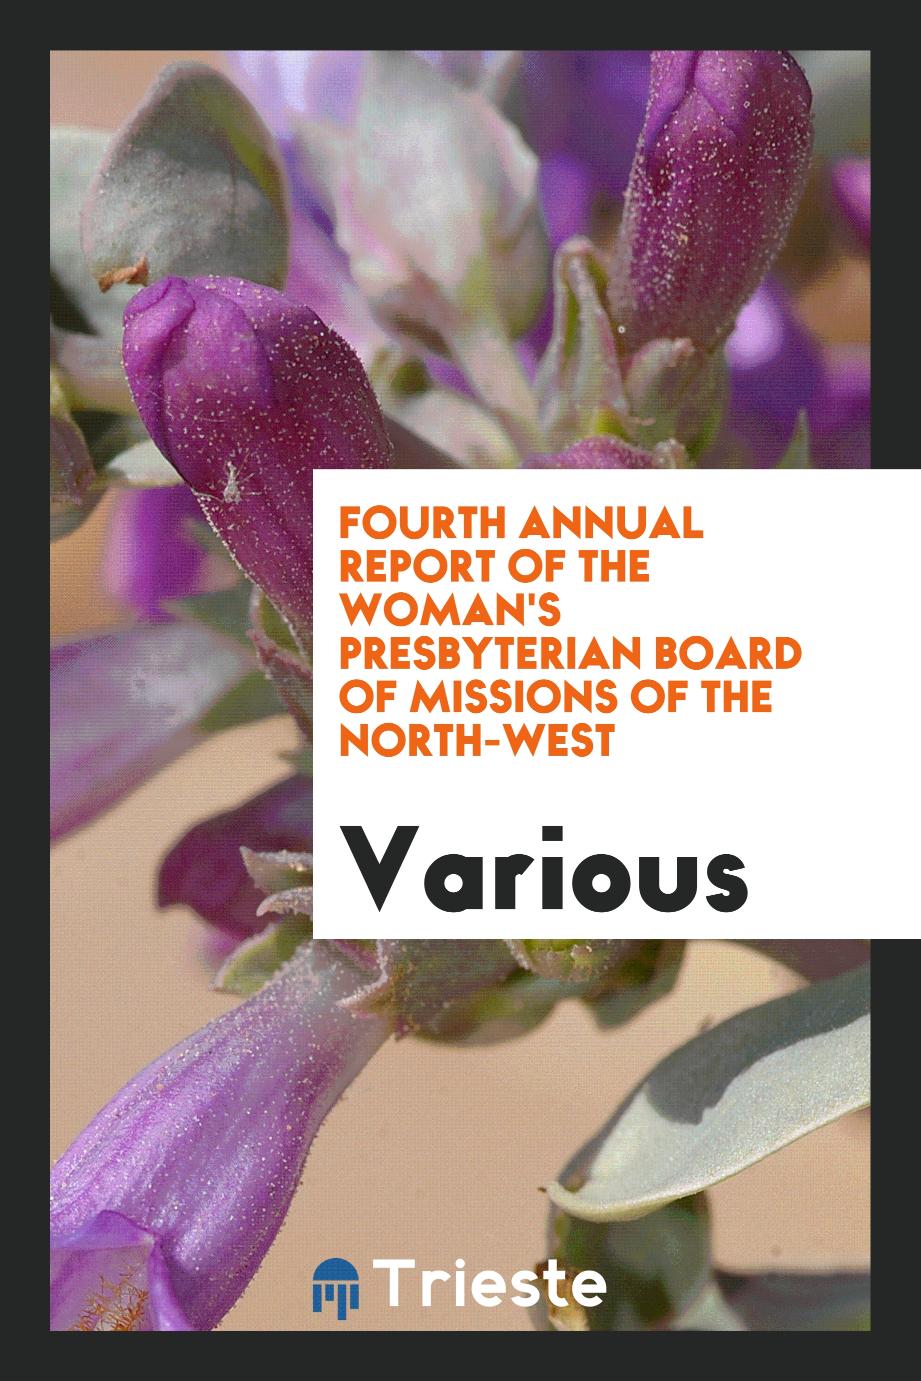 Fourth Annual Report of the Woman's Presbyterian Board of Missions of the North-West